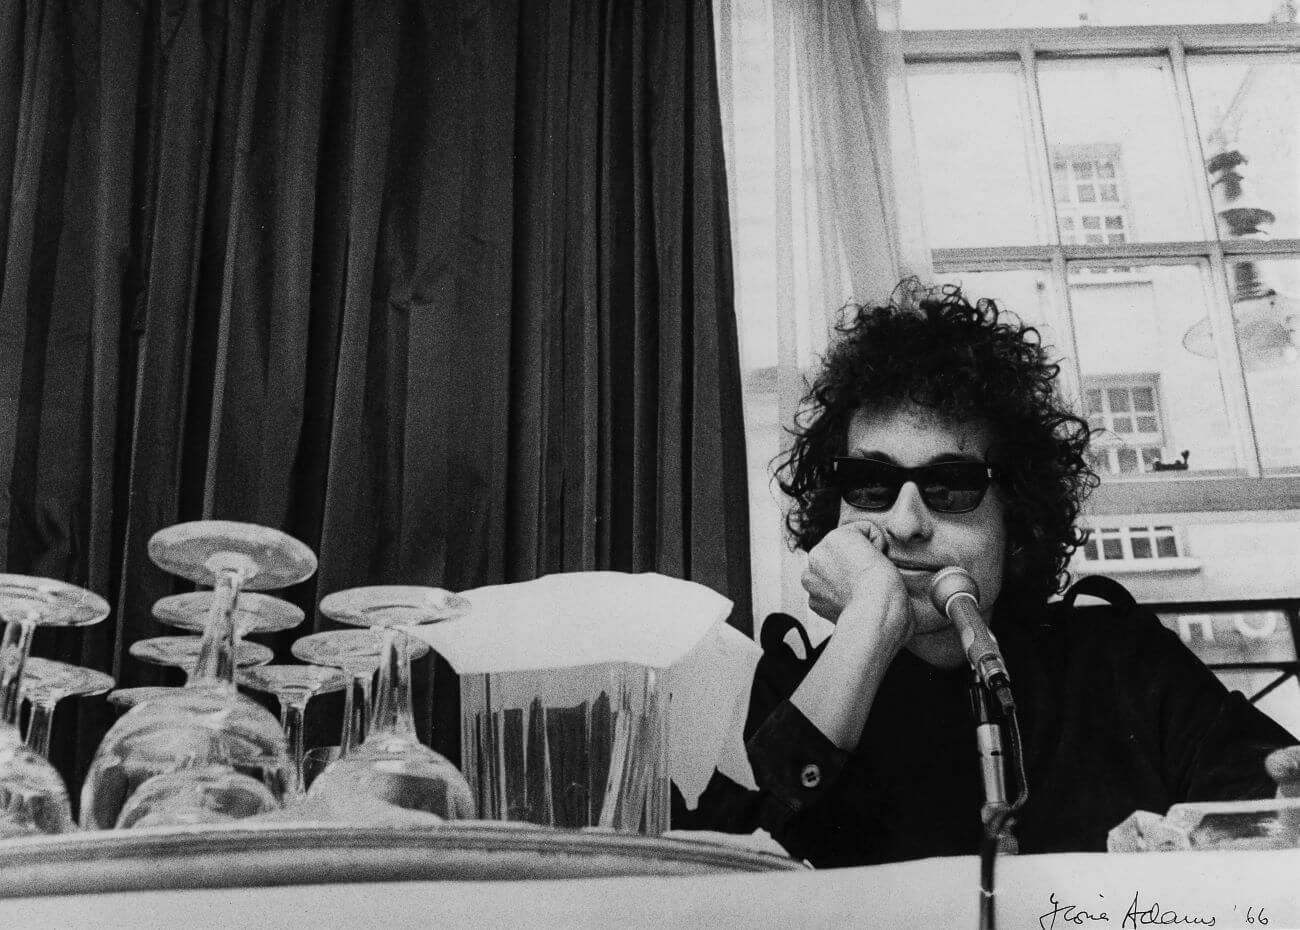 A black and white picture of Bob Dylan wearing sunglasses and sitting at a table in front of a microphone.